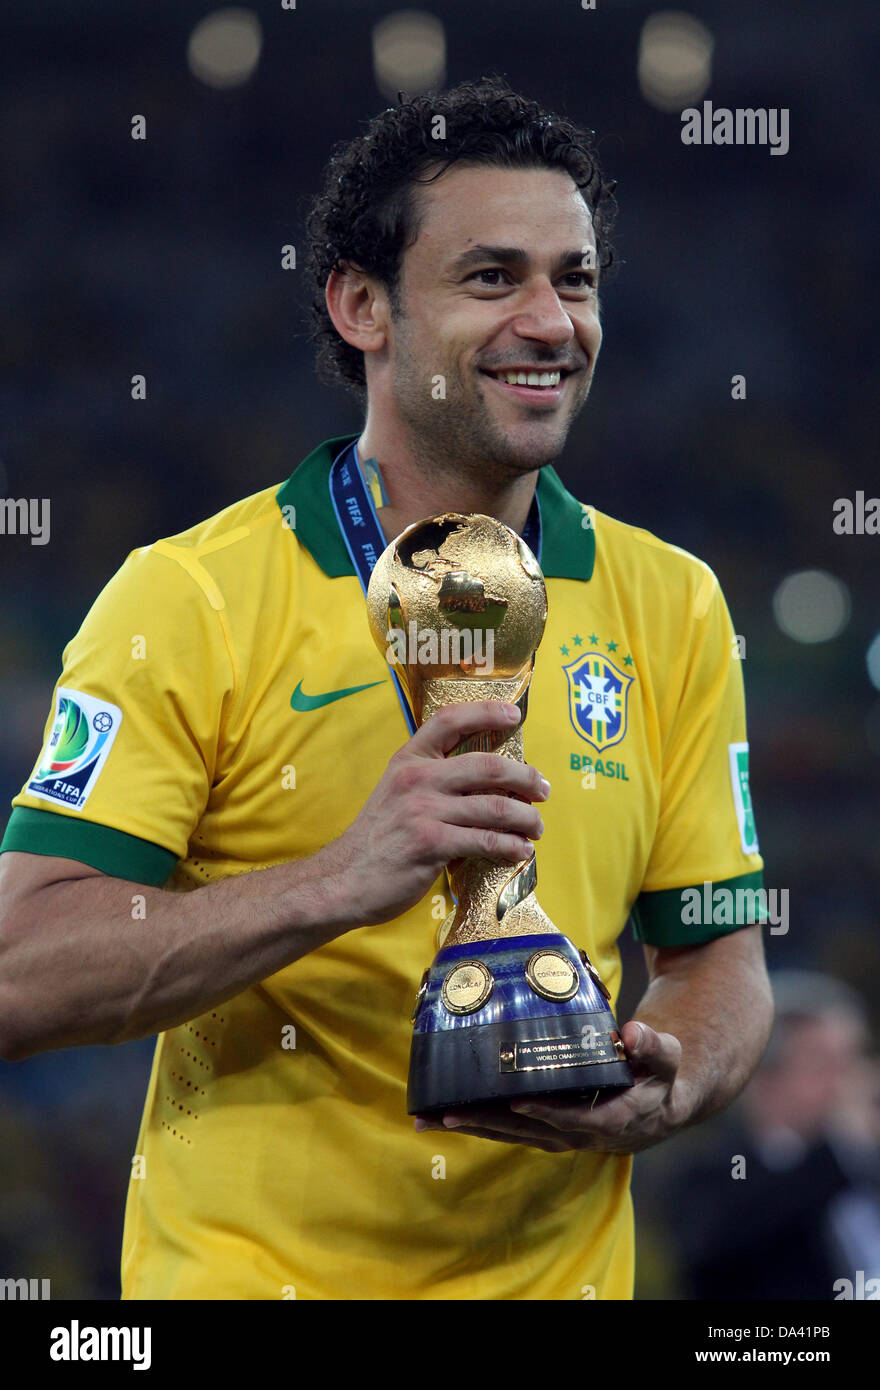 Fred (BRA), JUNE 30, 2013 - Football / Soccer : Fred of Brazil celebrates with the trophy after winning the FIFA Confederations Cup Brazil 2013 Final match between Brazil 3-0 Spain at Estadio do Maracana in Rio de Janeiro, Brazil. (Photo by Shin-ichiro Kaneko/AFLO) Stock Photo